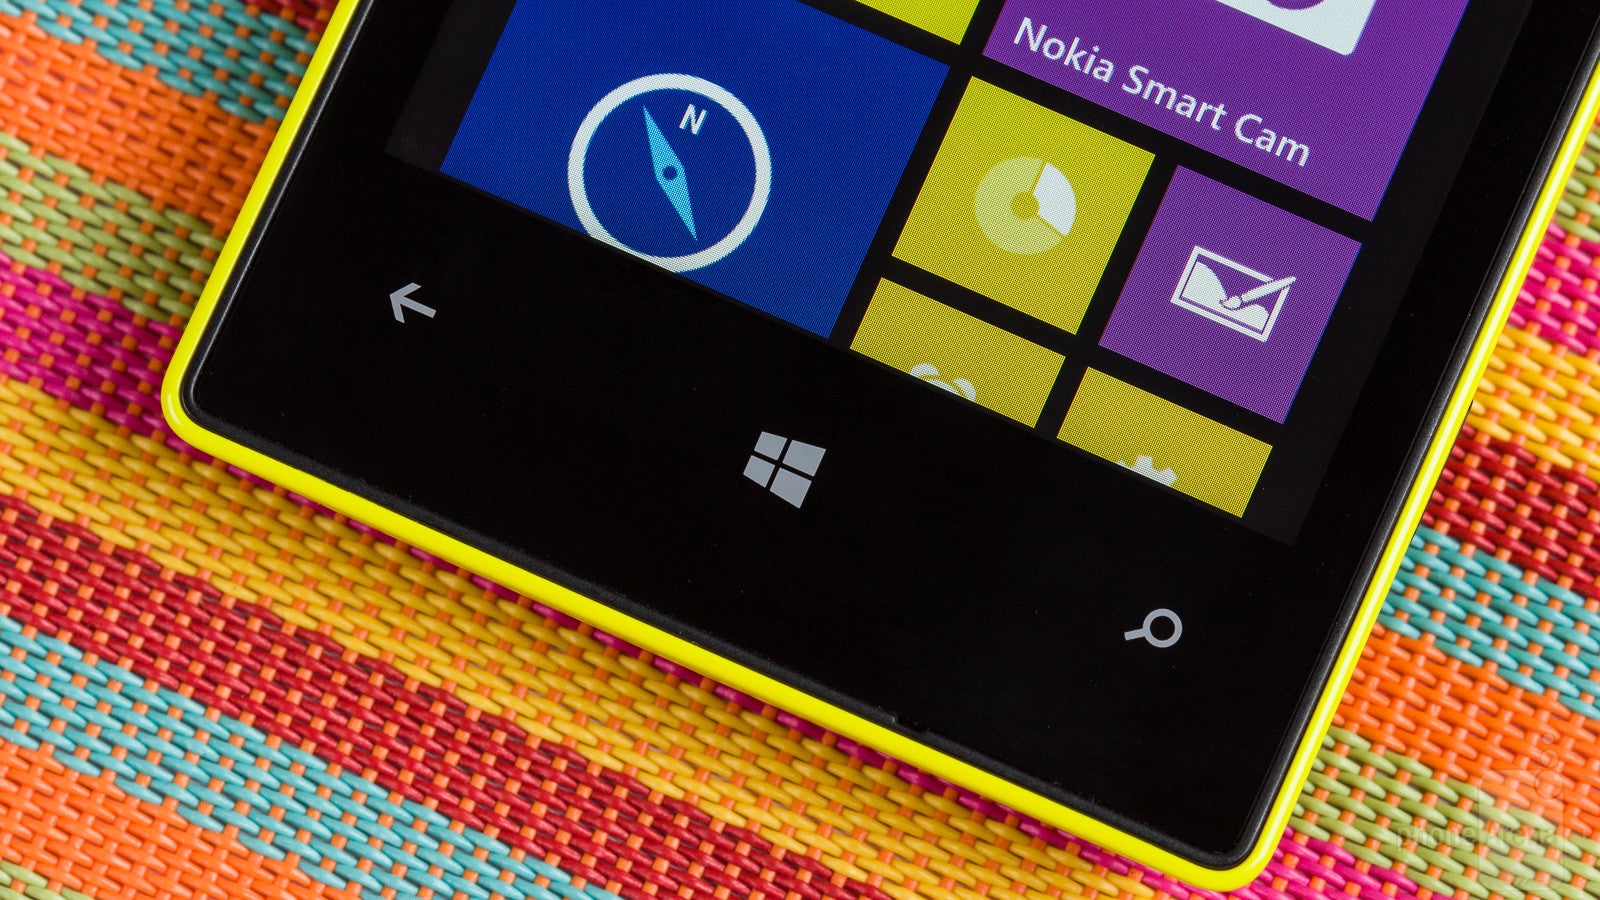 New Nokia Lumia 530 Rise reportedly headed to T-Mobile